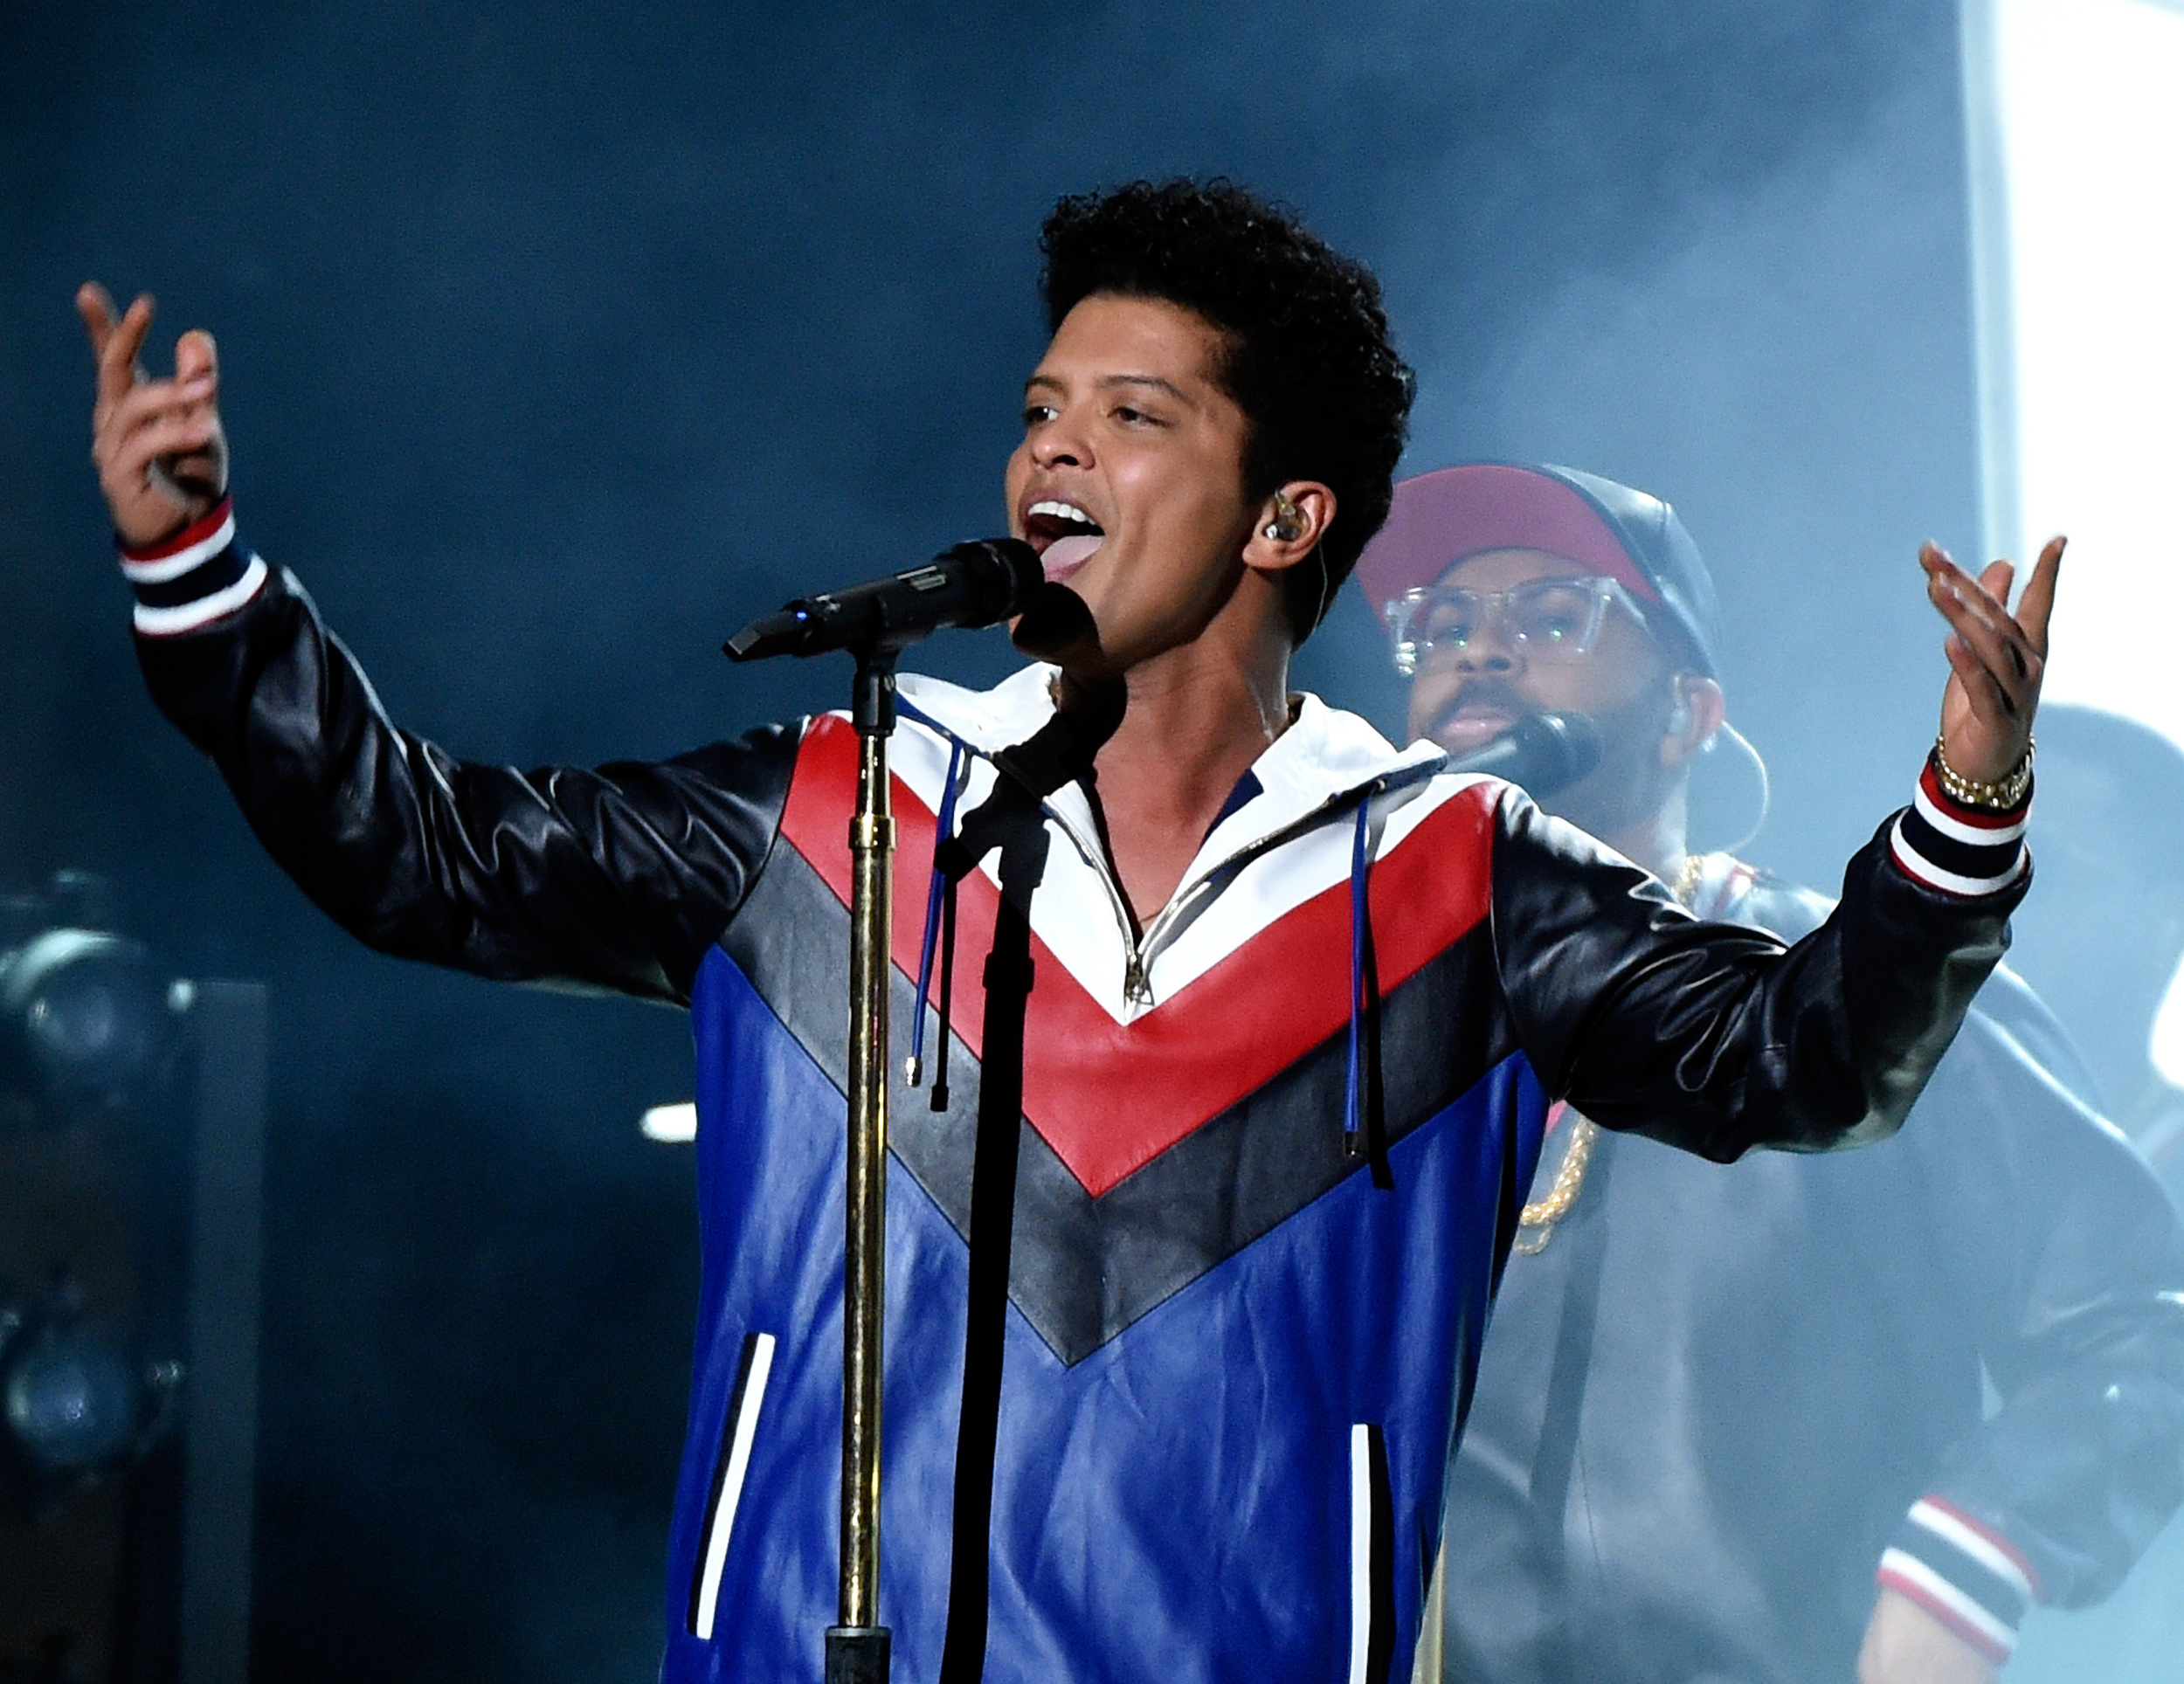 <p>Bruno Mars knows how to create a fun song. He's done it time and time again with hits like "Uptown Funk" and "Treasure," but it's "Locked Out Of Heaven" that's earned a spot on this list.</p><p>You may also like: <a href='https://www.yardbarker.com/entertainment/articles/steven_spielbergs_20_best_movies_ranked/s1__38134707'>Ranking the 20 best films from Steven Spielberg</a></p>